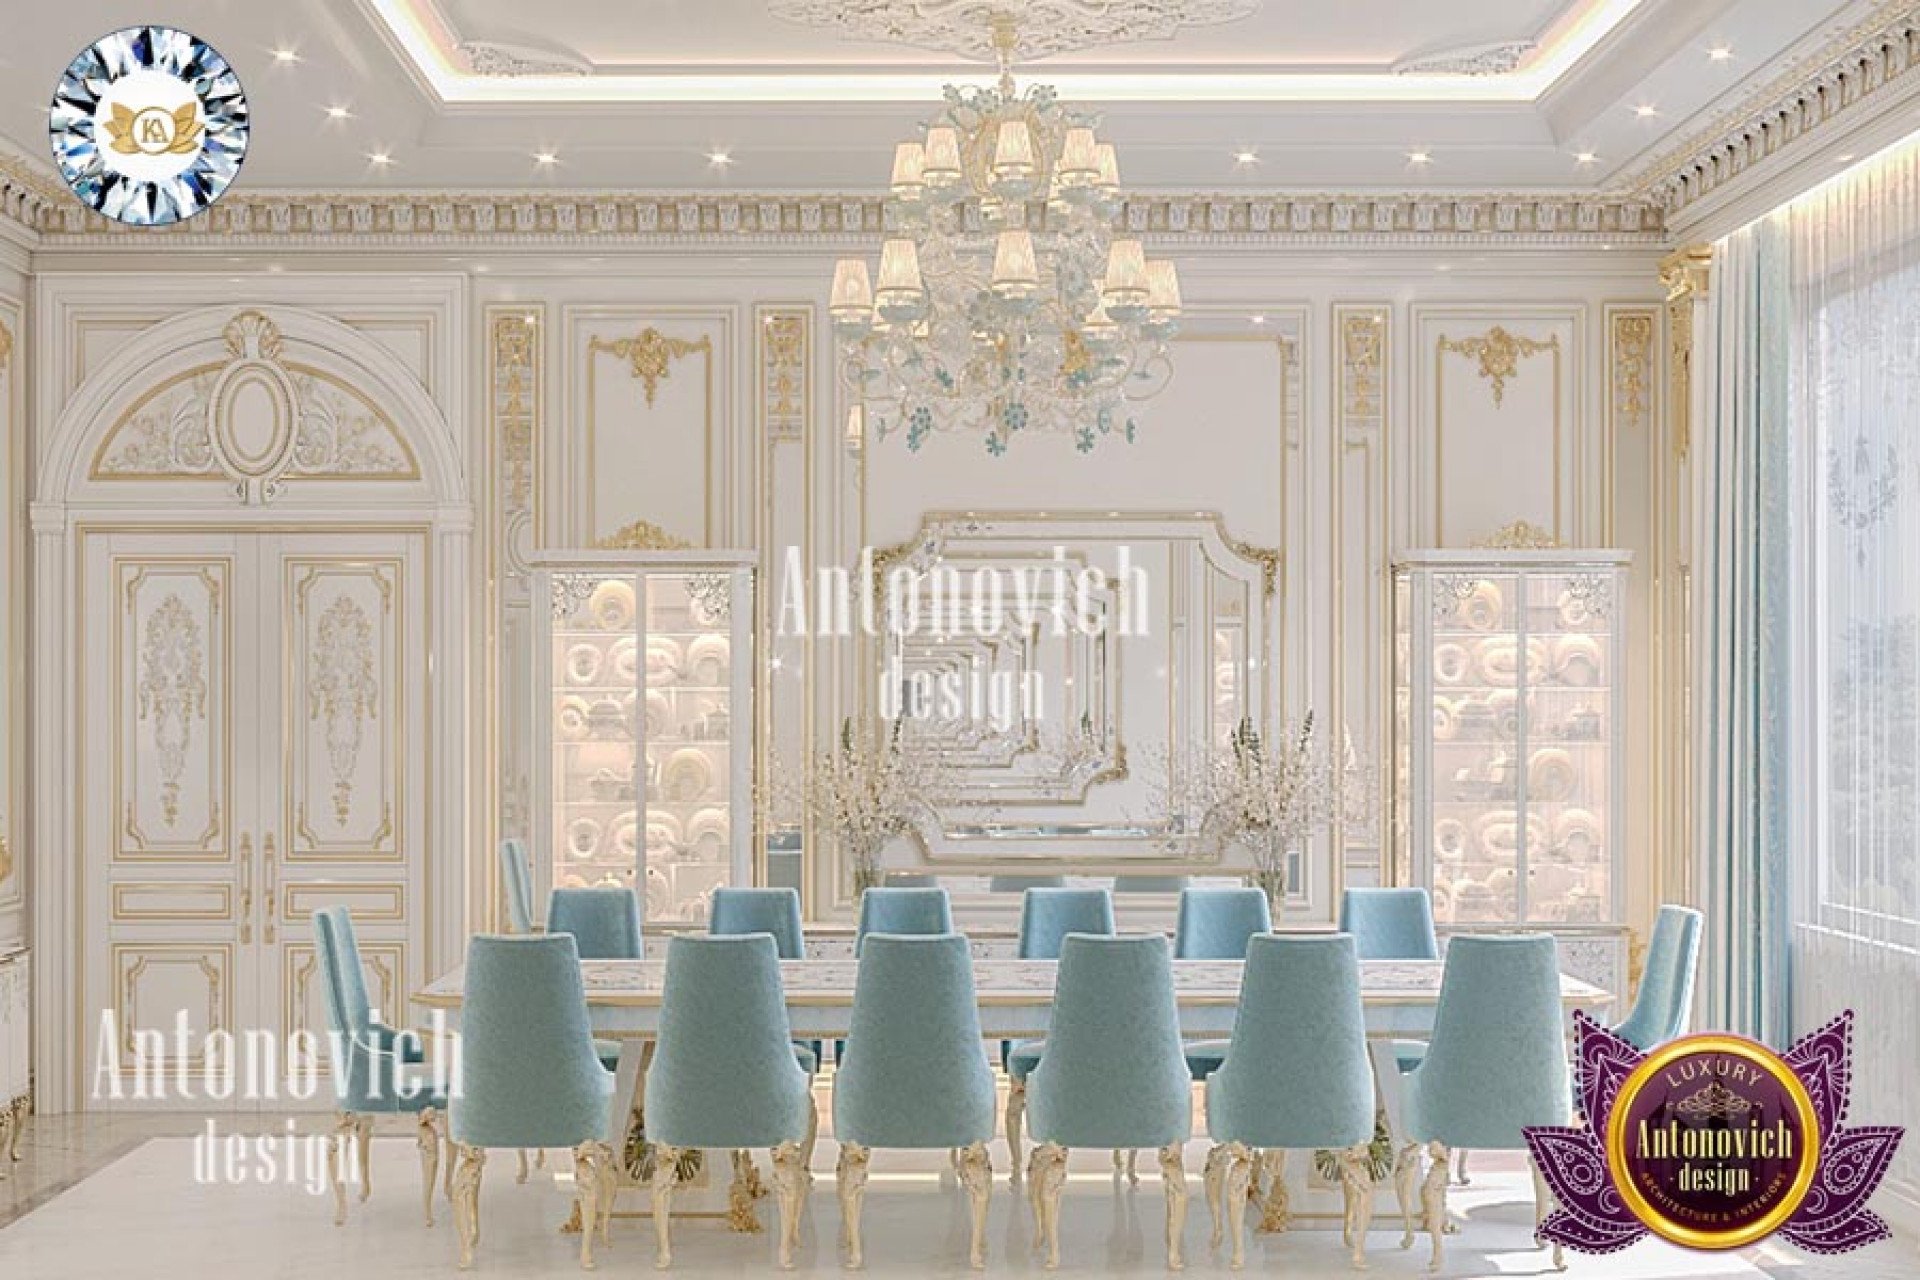 HOW TO SELECT DINING ROOM FURNITURES FOR LUXURY INTERIOR DESIGN?